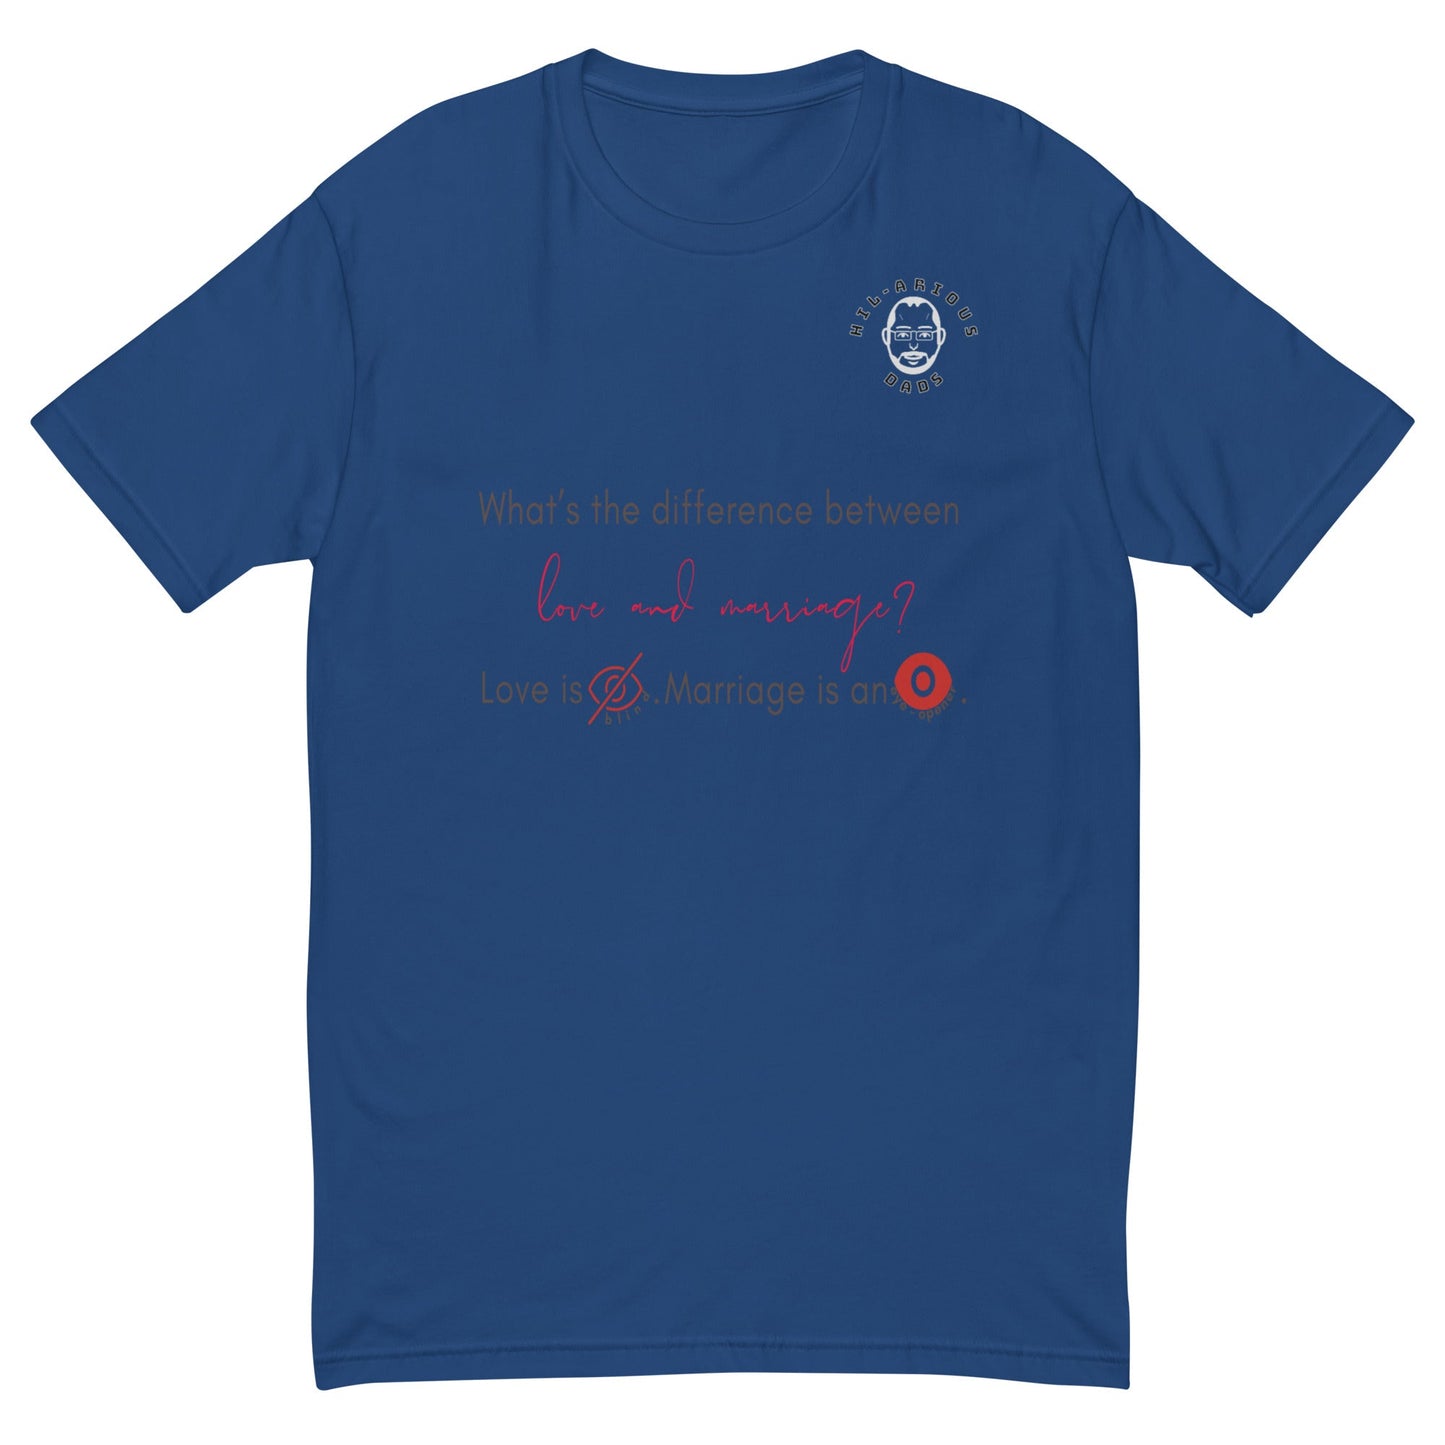 What’s the difference between love and marriage?-T-shirt - Hil-arious Dads